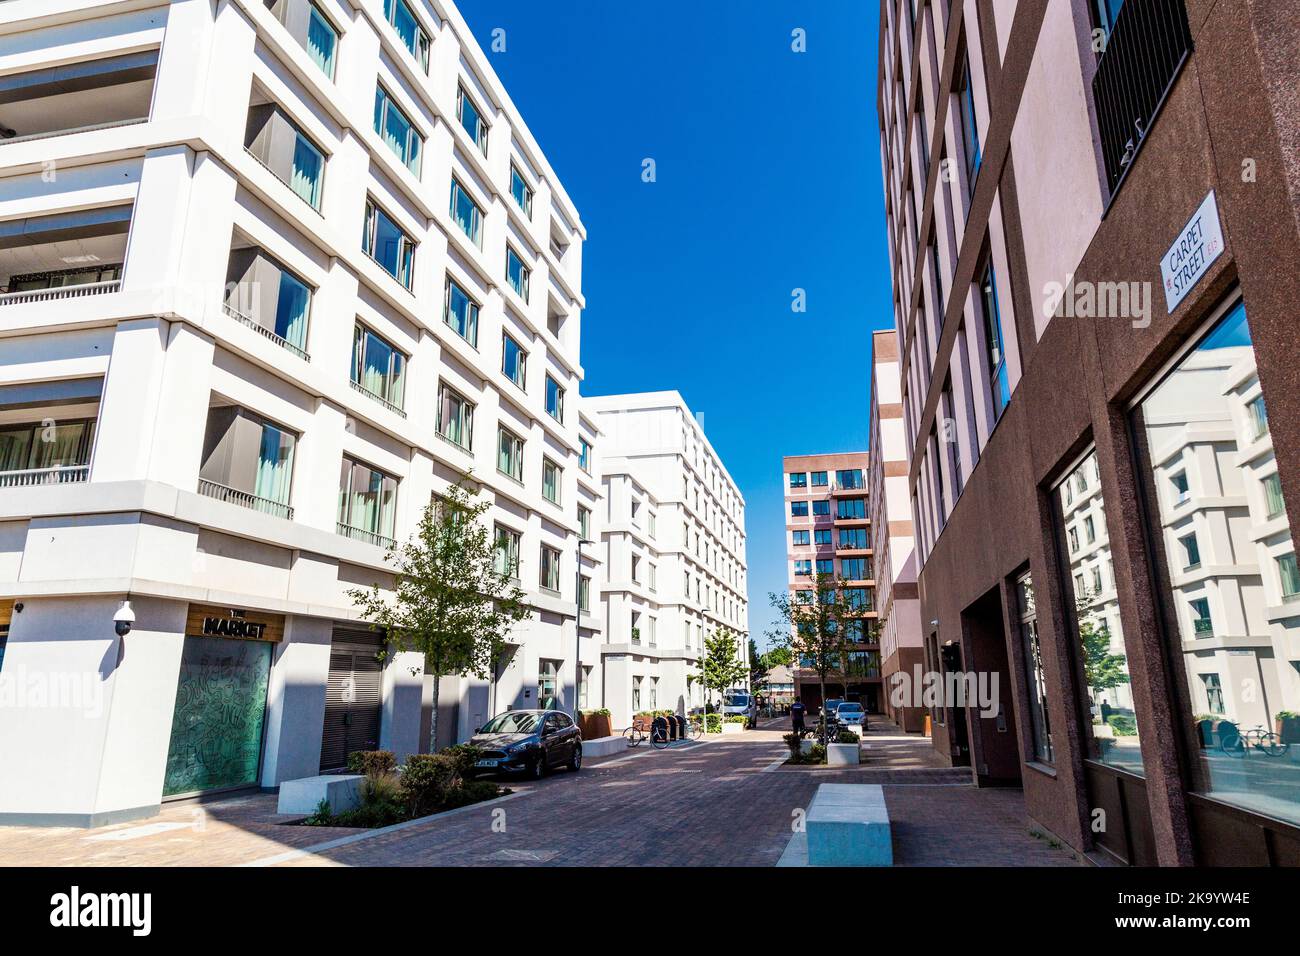 Residential new builds at Carpet Street, Sugar House Island, London, UK Stock Photo